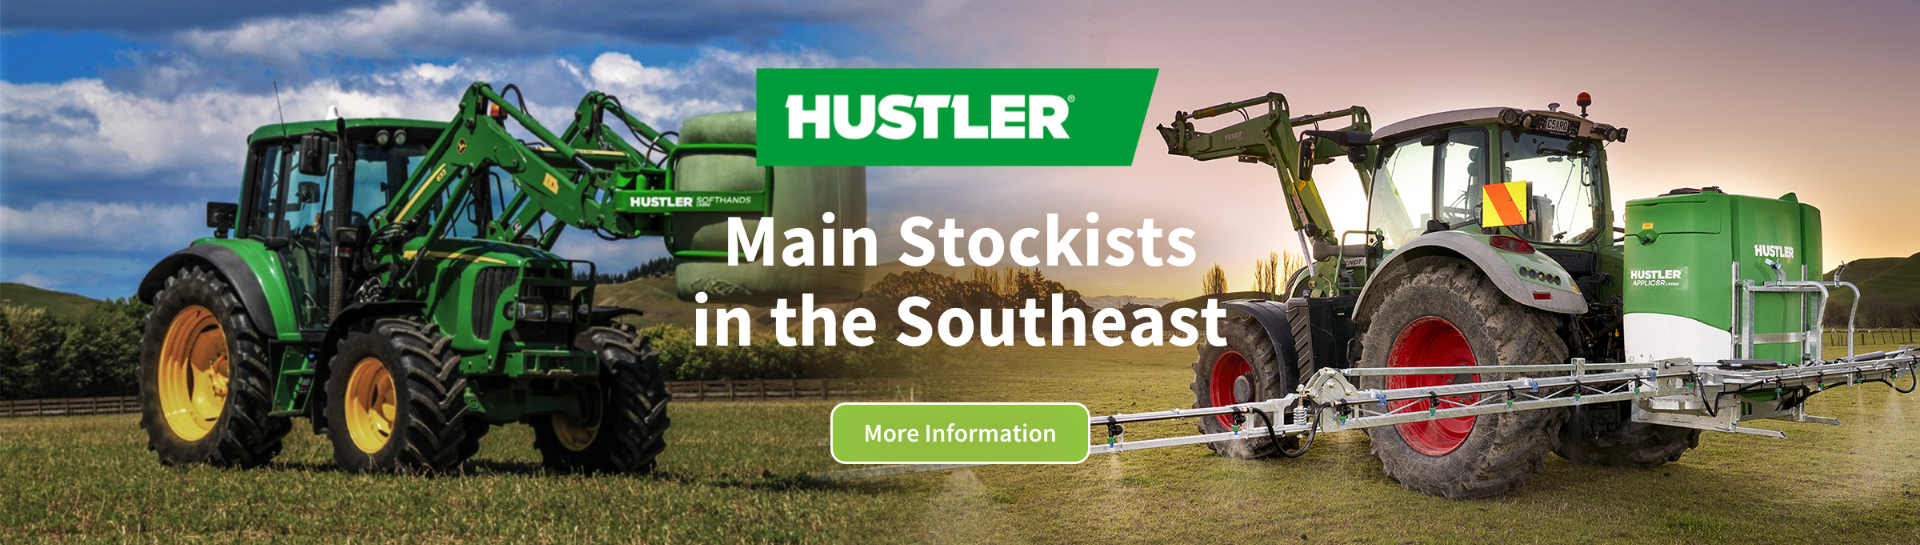 Hustler. Main stockists in the Southeast